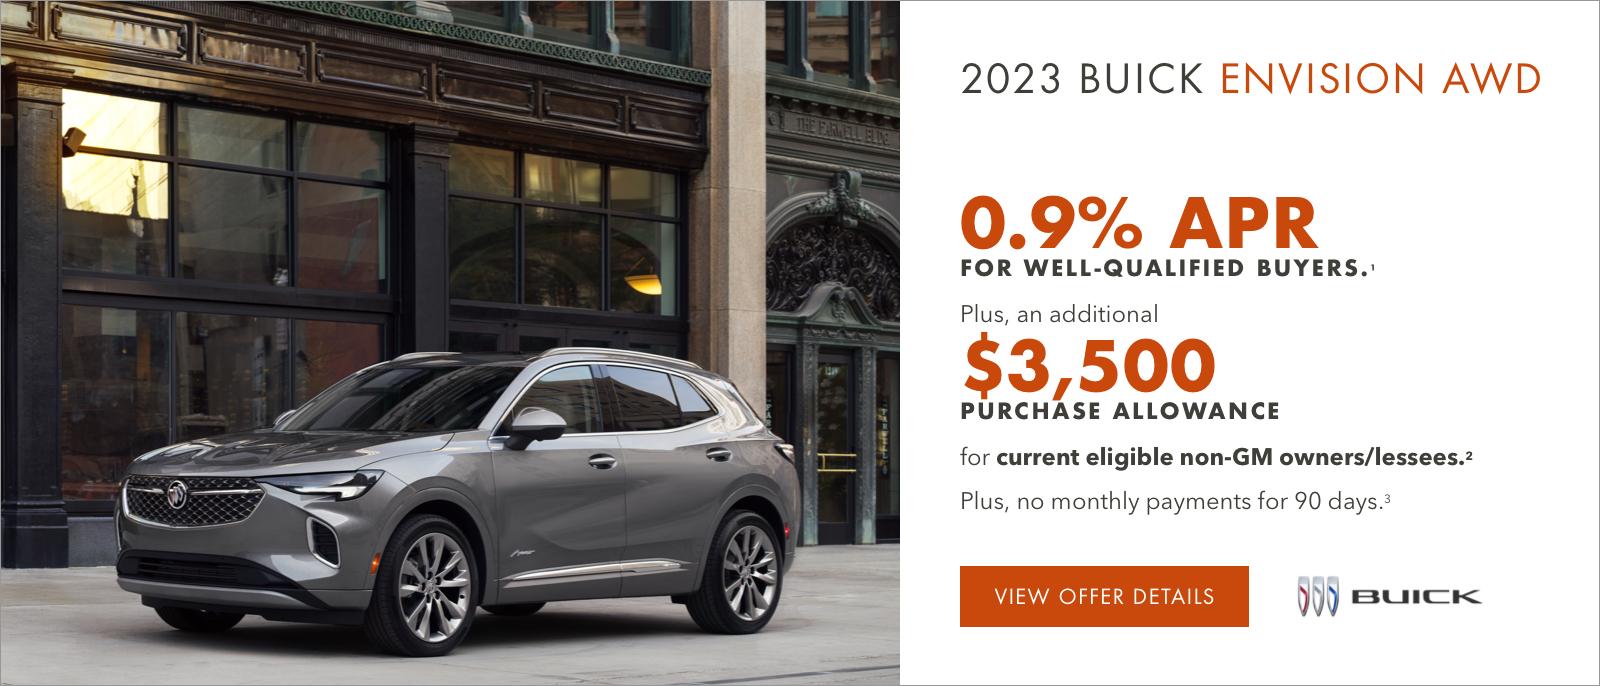 2023 Buick ENVISION AWD

0.9% APR 
FOR WELL-QUALIFIED BUYERS.1

Plus, an additional $3,500 PURCHASE ALLOWANCE for current eligible non-GM owners/lessees.2

Plus, no monthly payments for 90 days.3